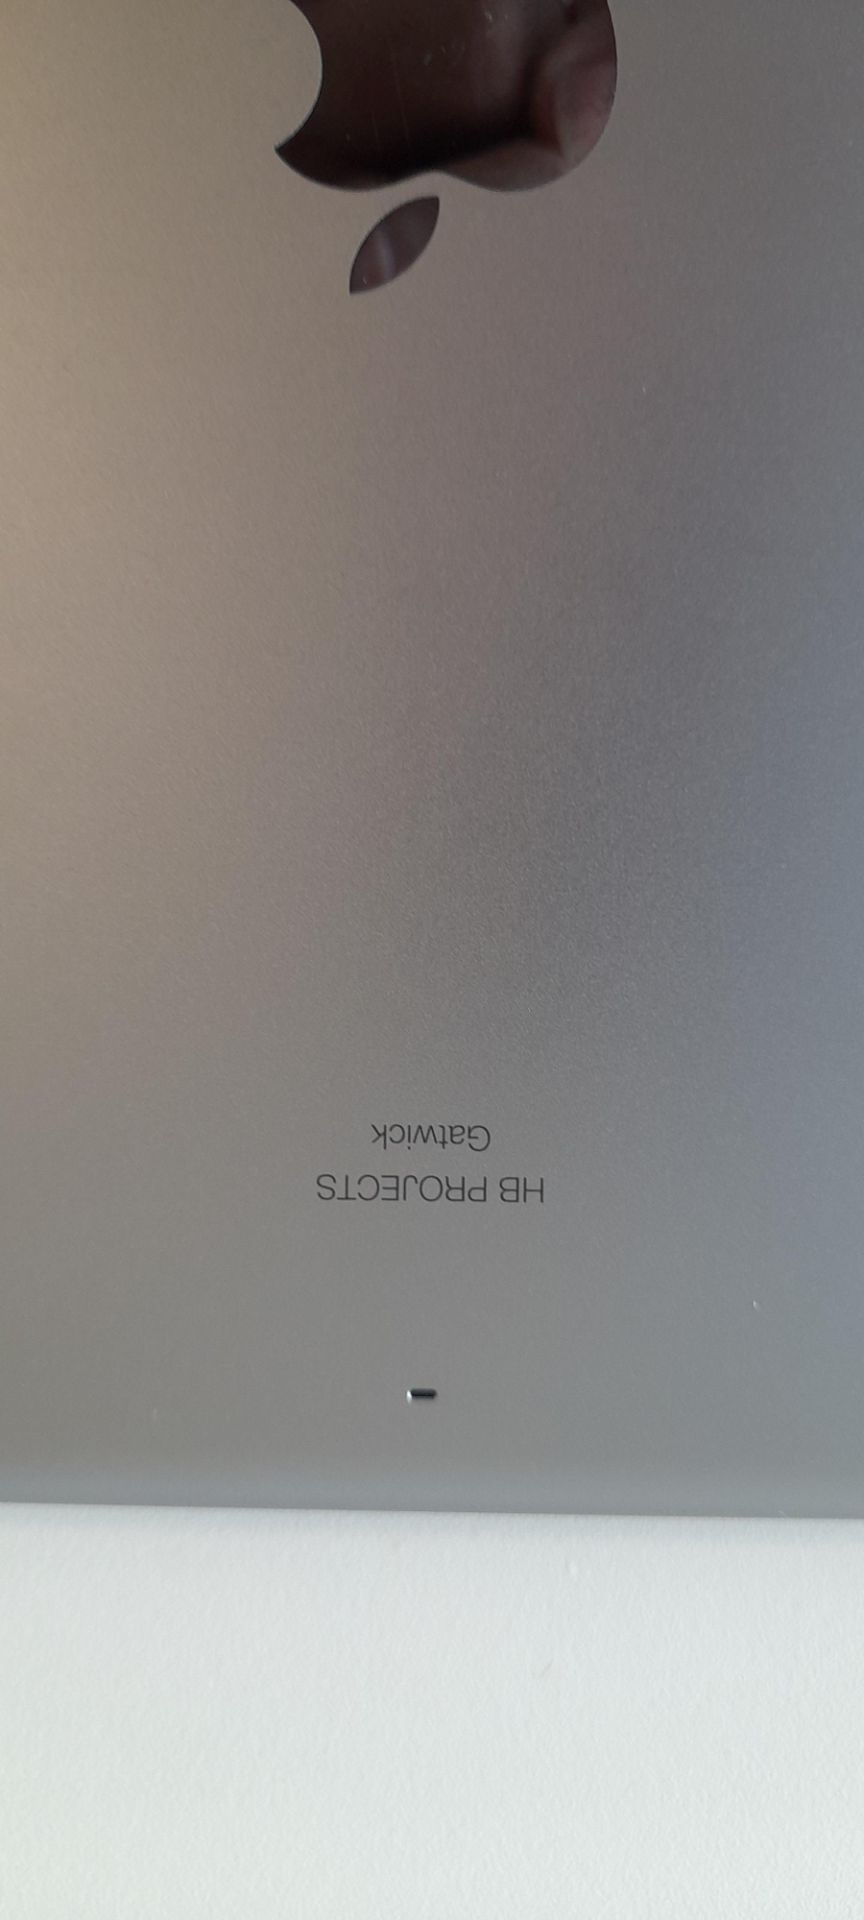 Apple iPad Air Wi-Fi, Model A1474, Space Grey. S/N DMPQL561FK129. Collection from Canary Wharf, - Image 6 of 6